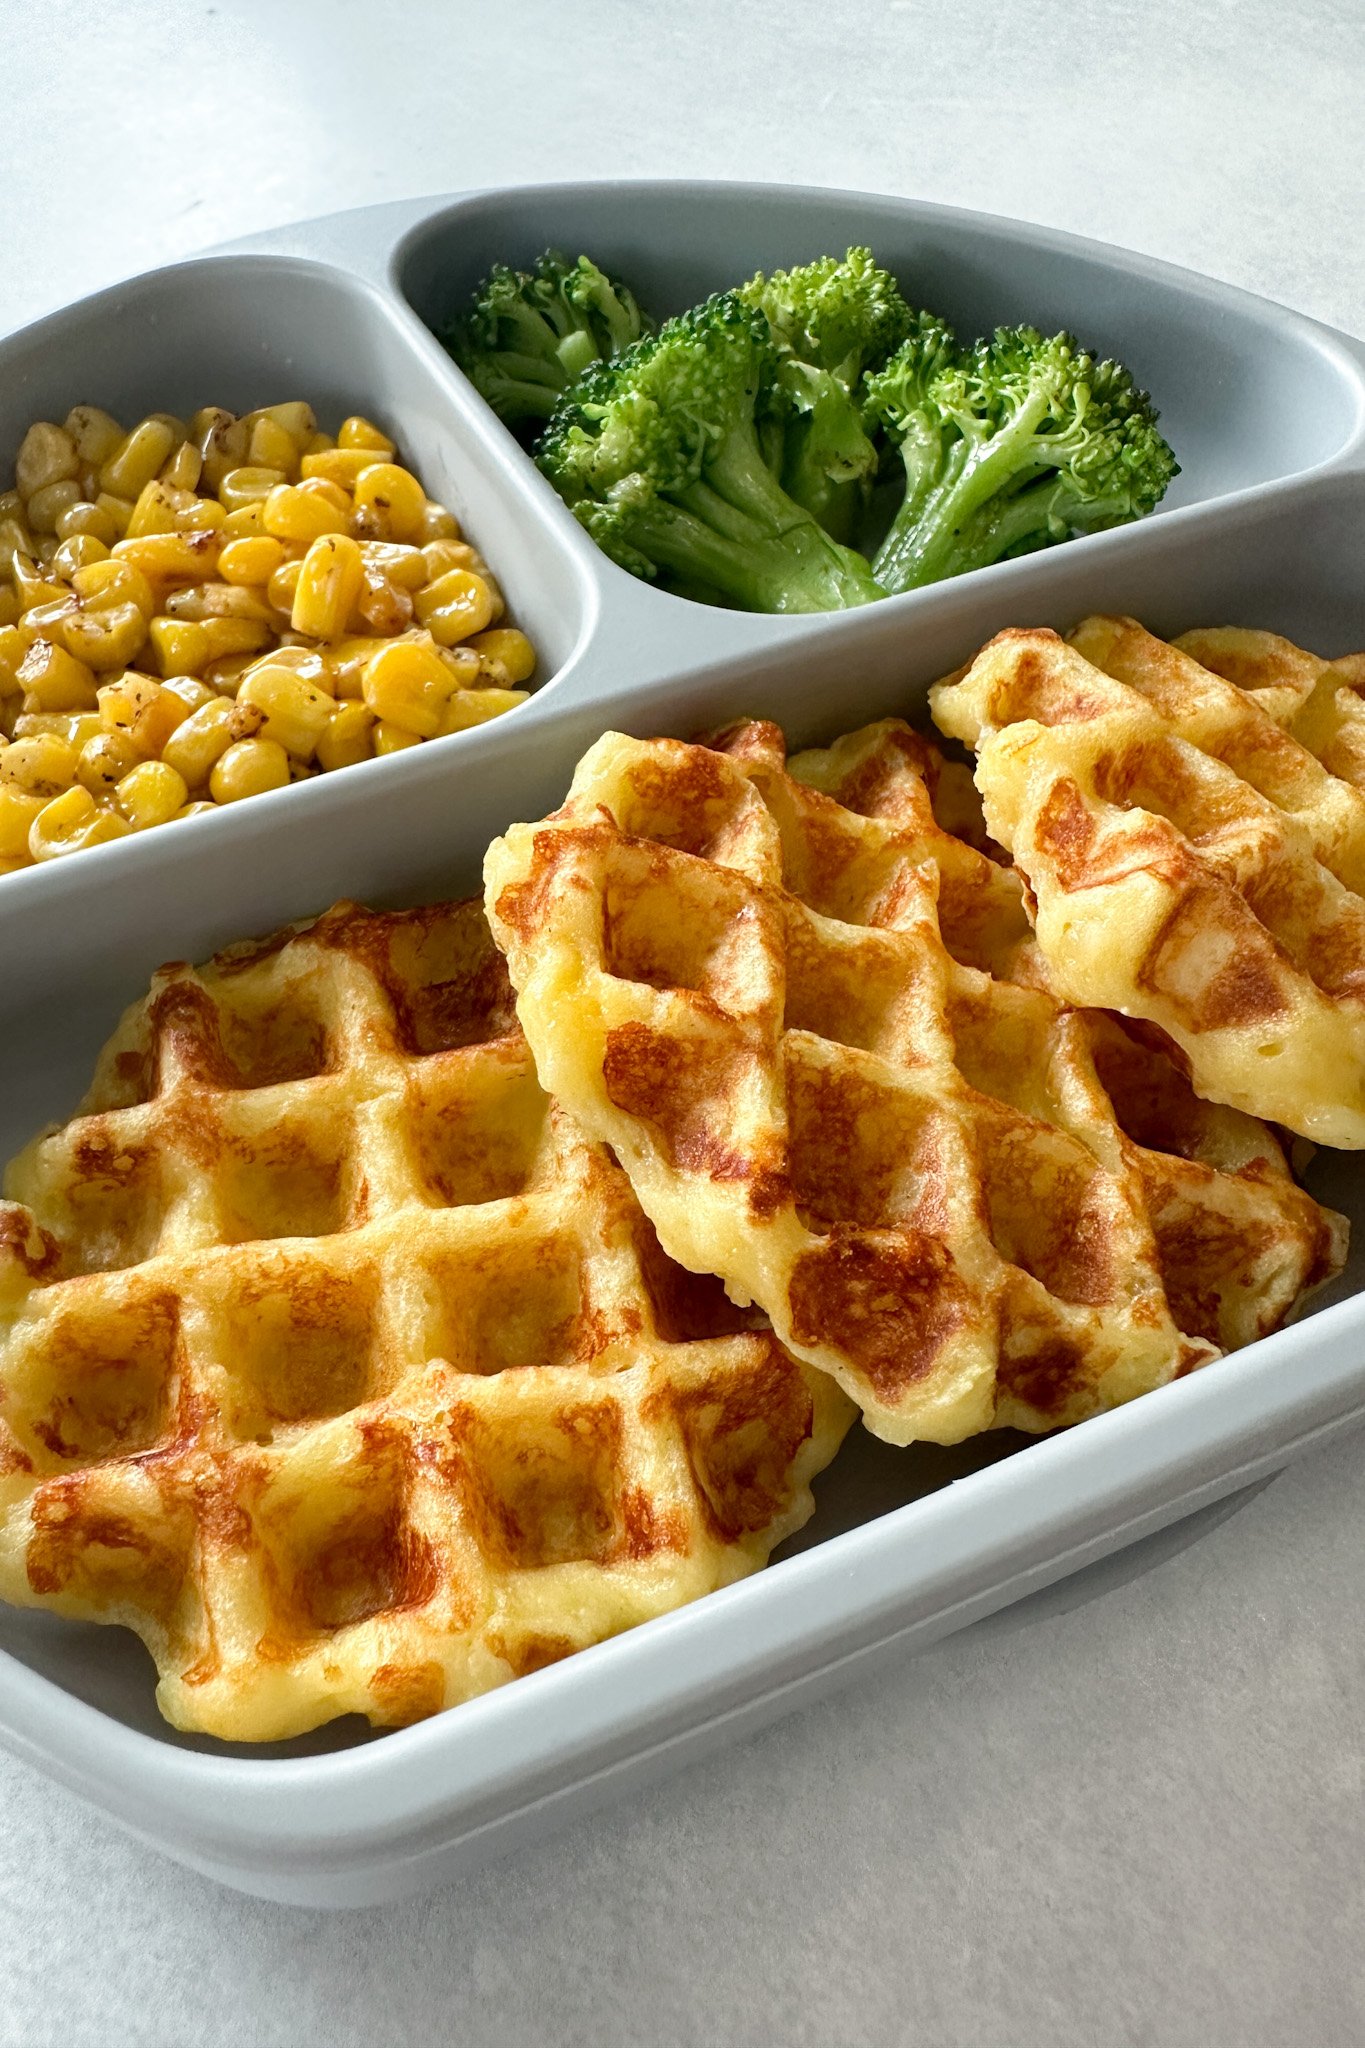 Leftover mashed potato waffles served with broccoli and corn.